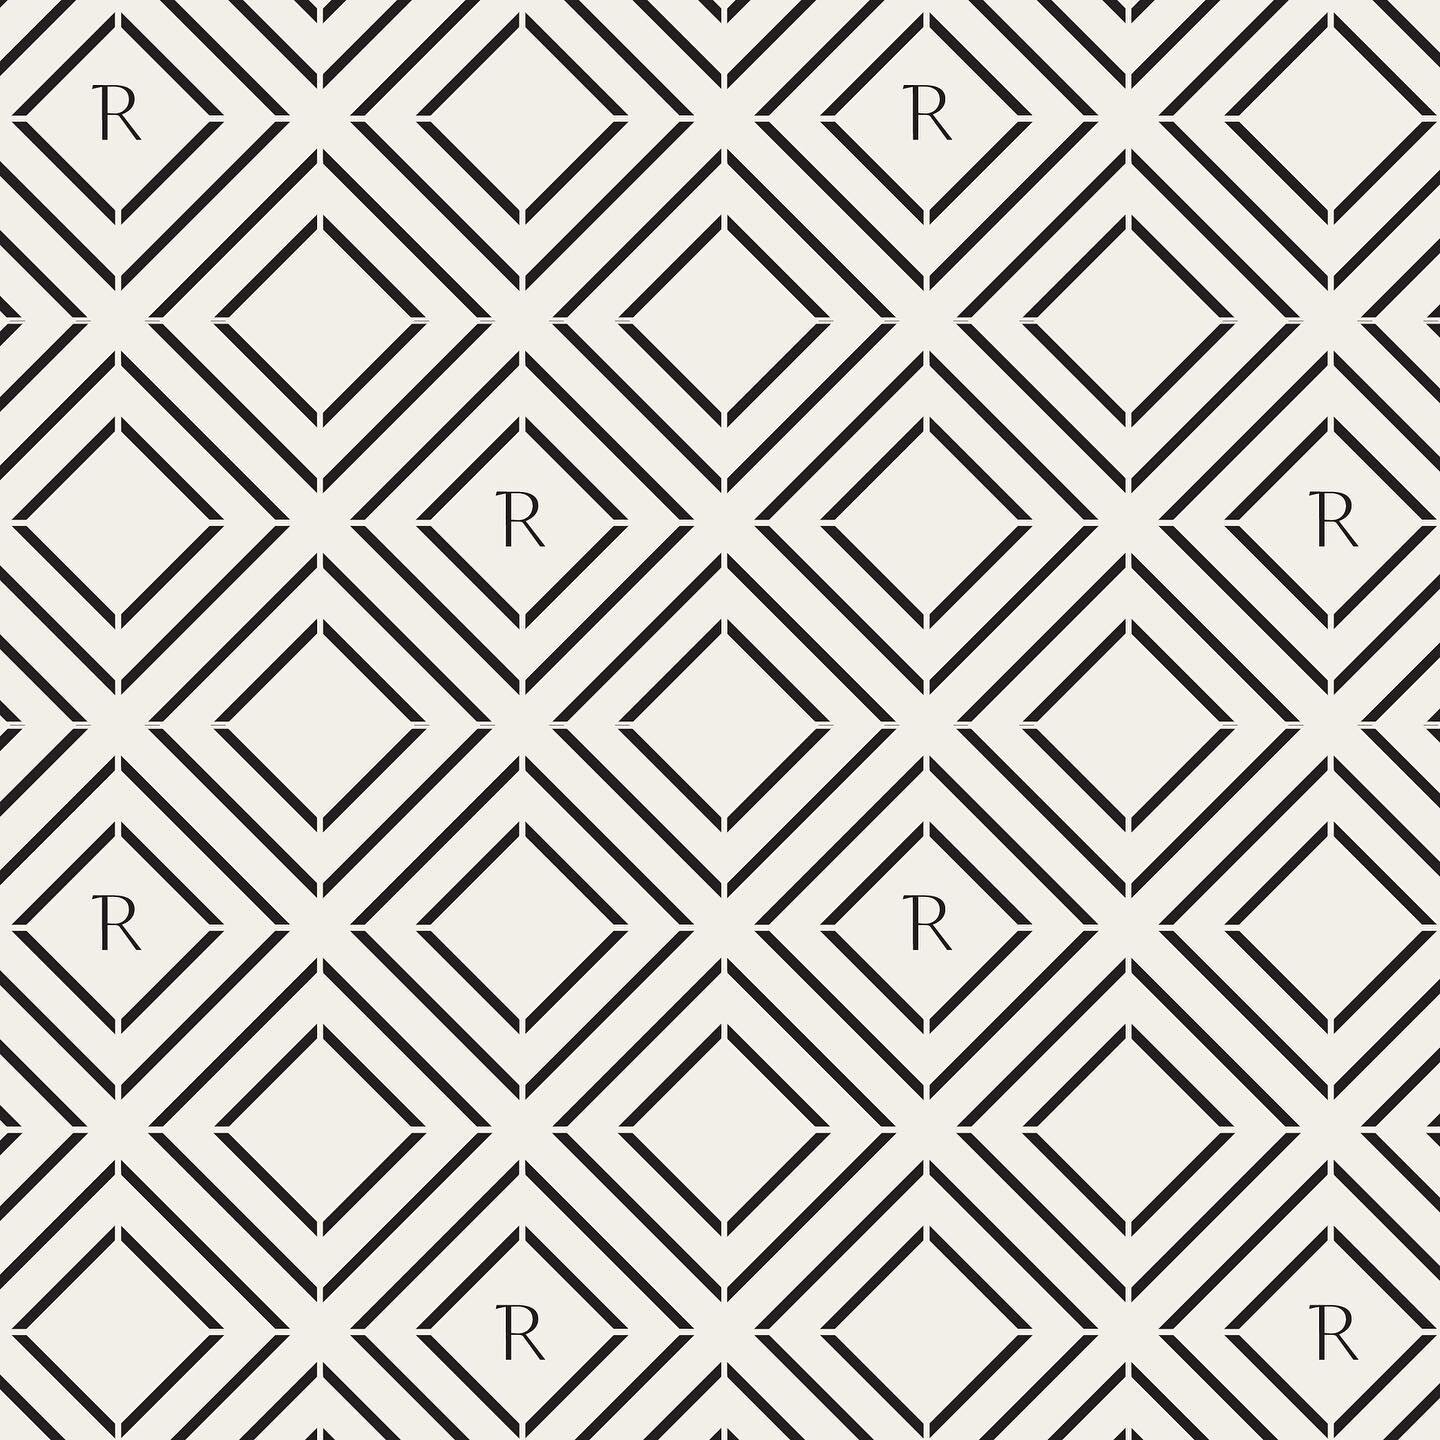 This is one of the brand patterns that was created for The Revere and its definitely one of my favorite parts of their new brand identity! Sharing more about this brand and project soon 🖤 &bull;
&bull;
&bull;
&bull;
&bull;
#womeninbusiness #logodesi